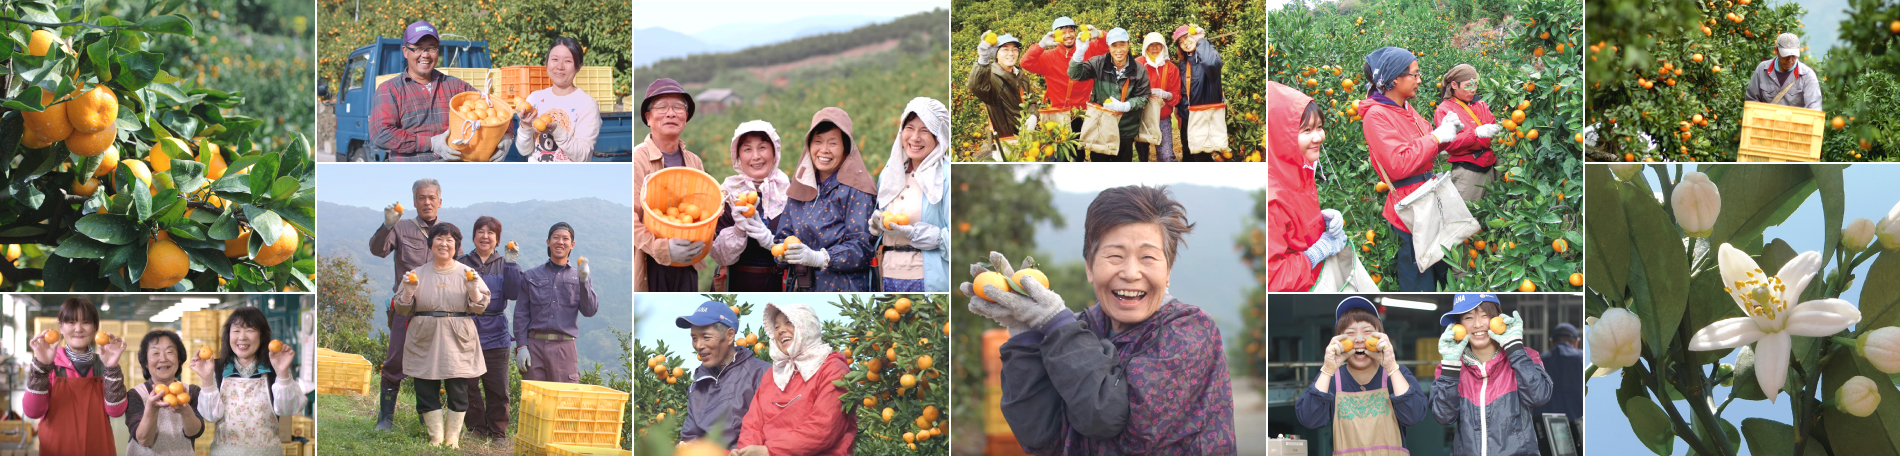 Faces of the Growers Who Support the Nanyo, Ehime Citrus Fruit Agricultural System